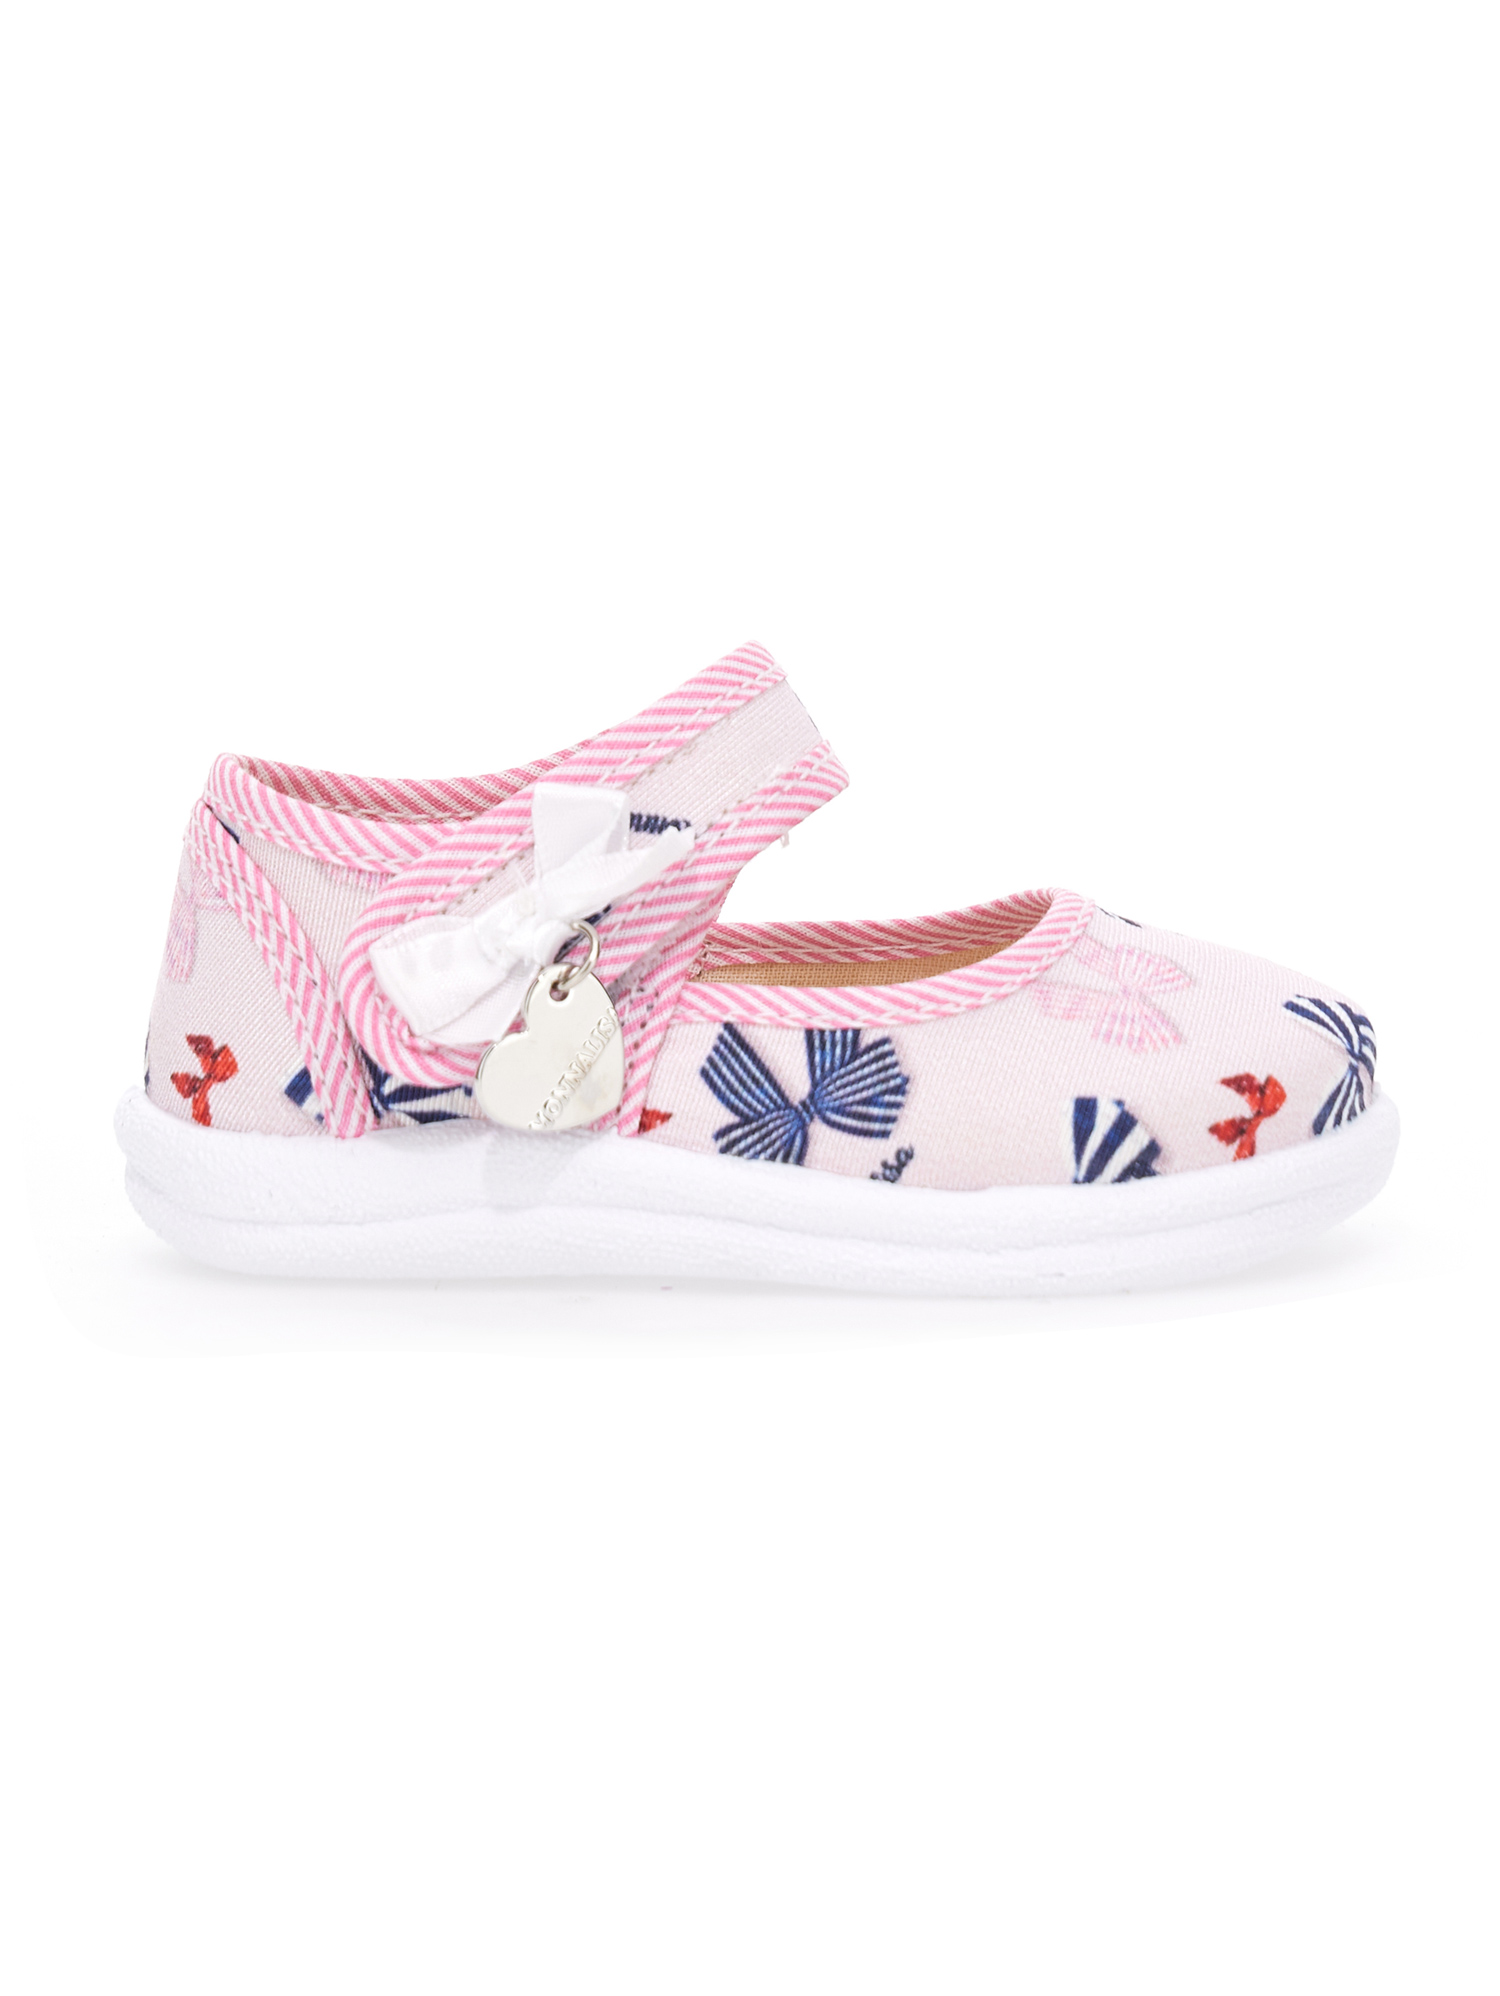 Monnalisa Ottoman Ballet Flats With Bow Print In Pink + Navy Blue